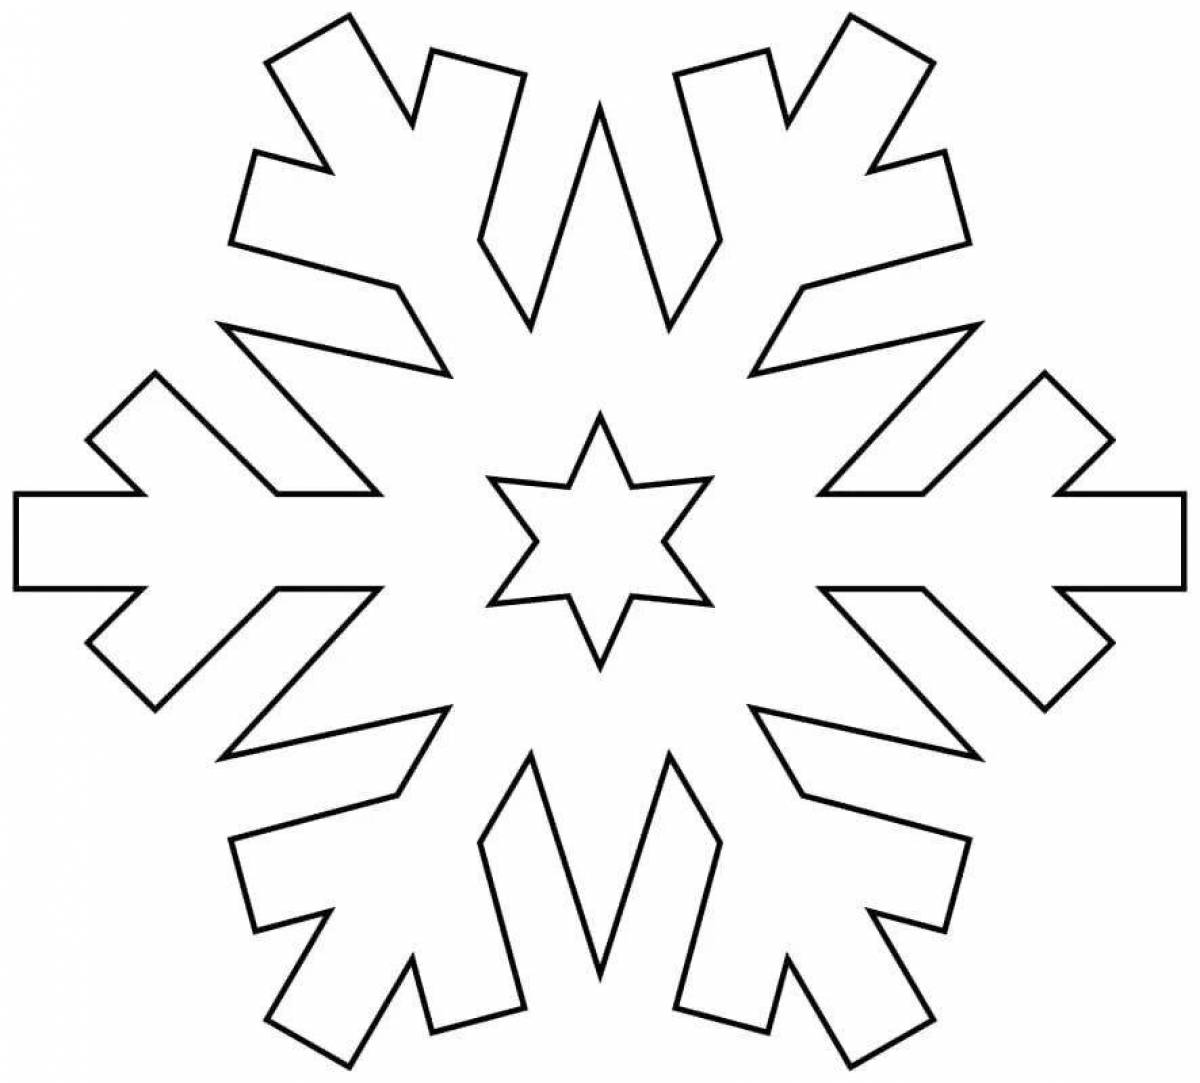 Violent snowflake coloring book for 4-5 year olds